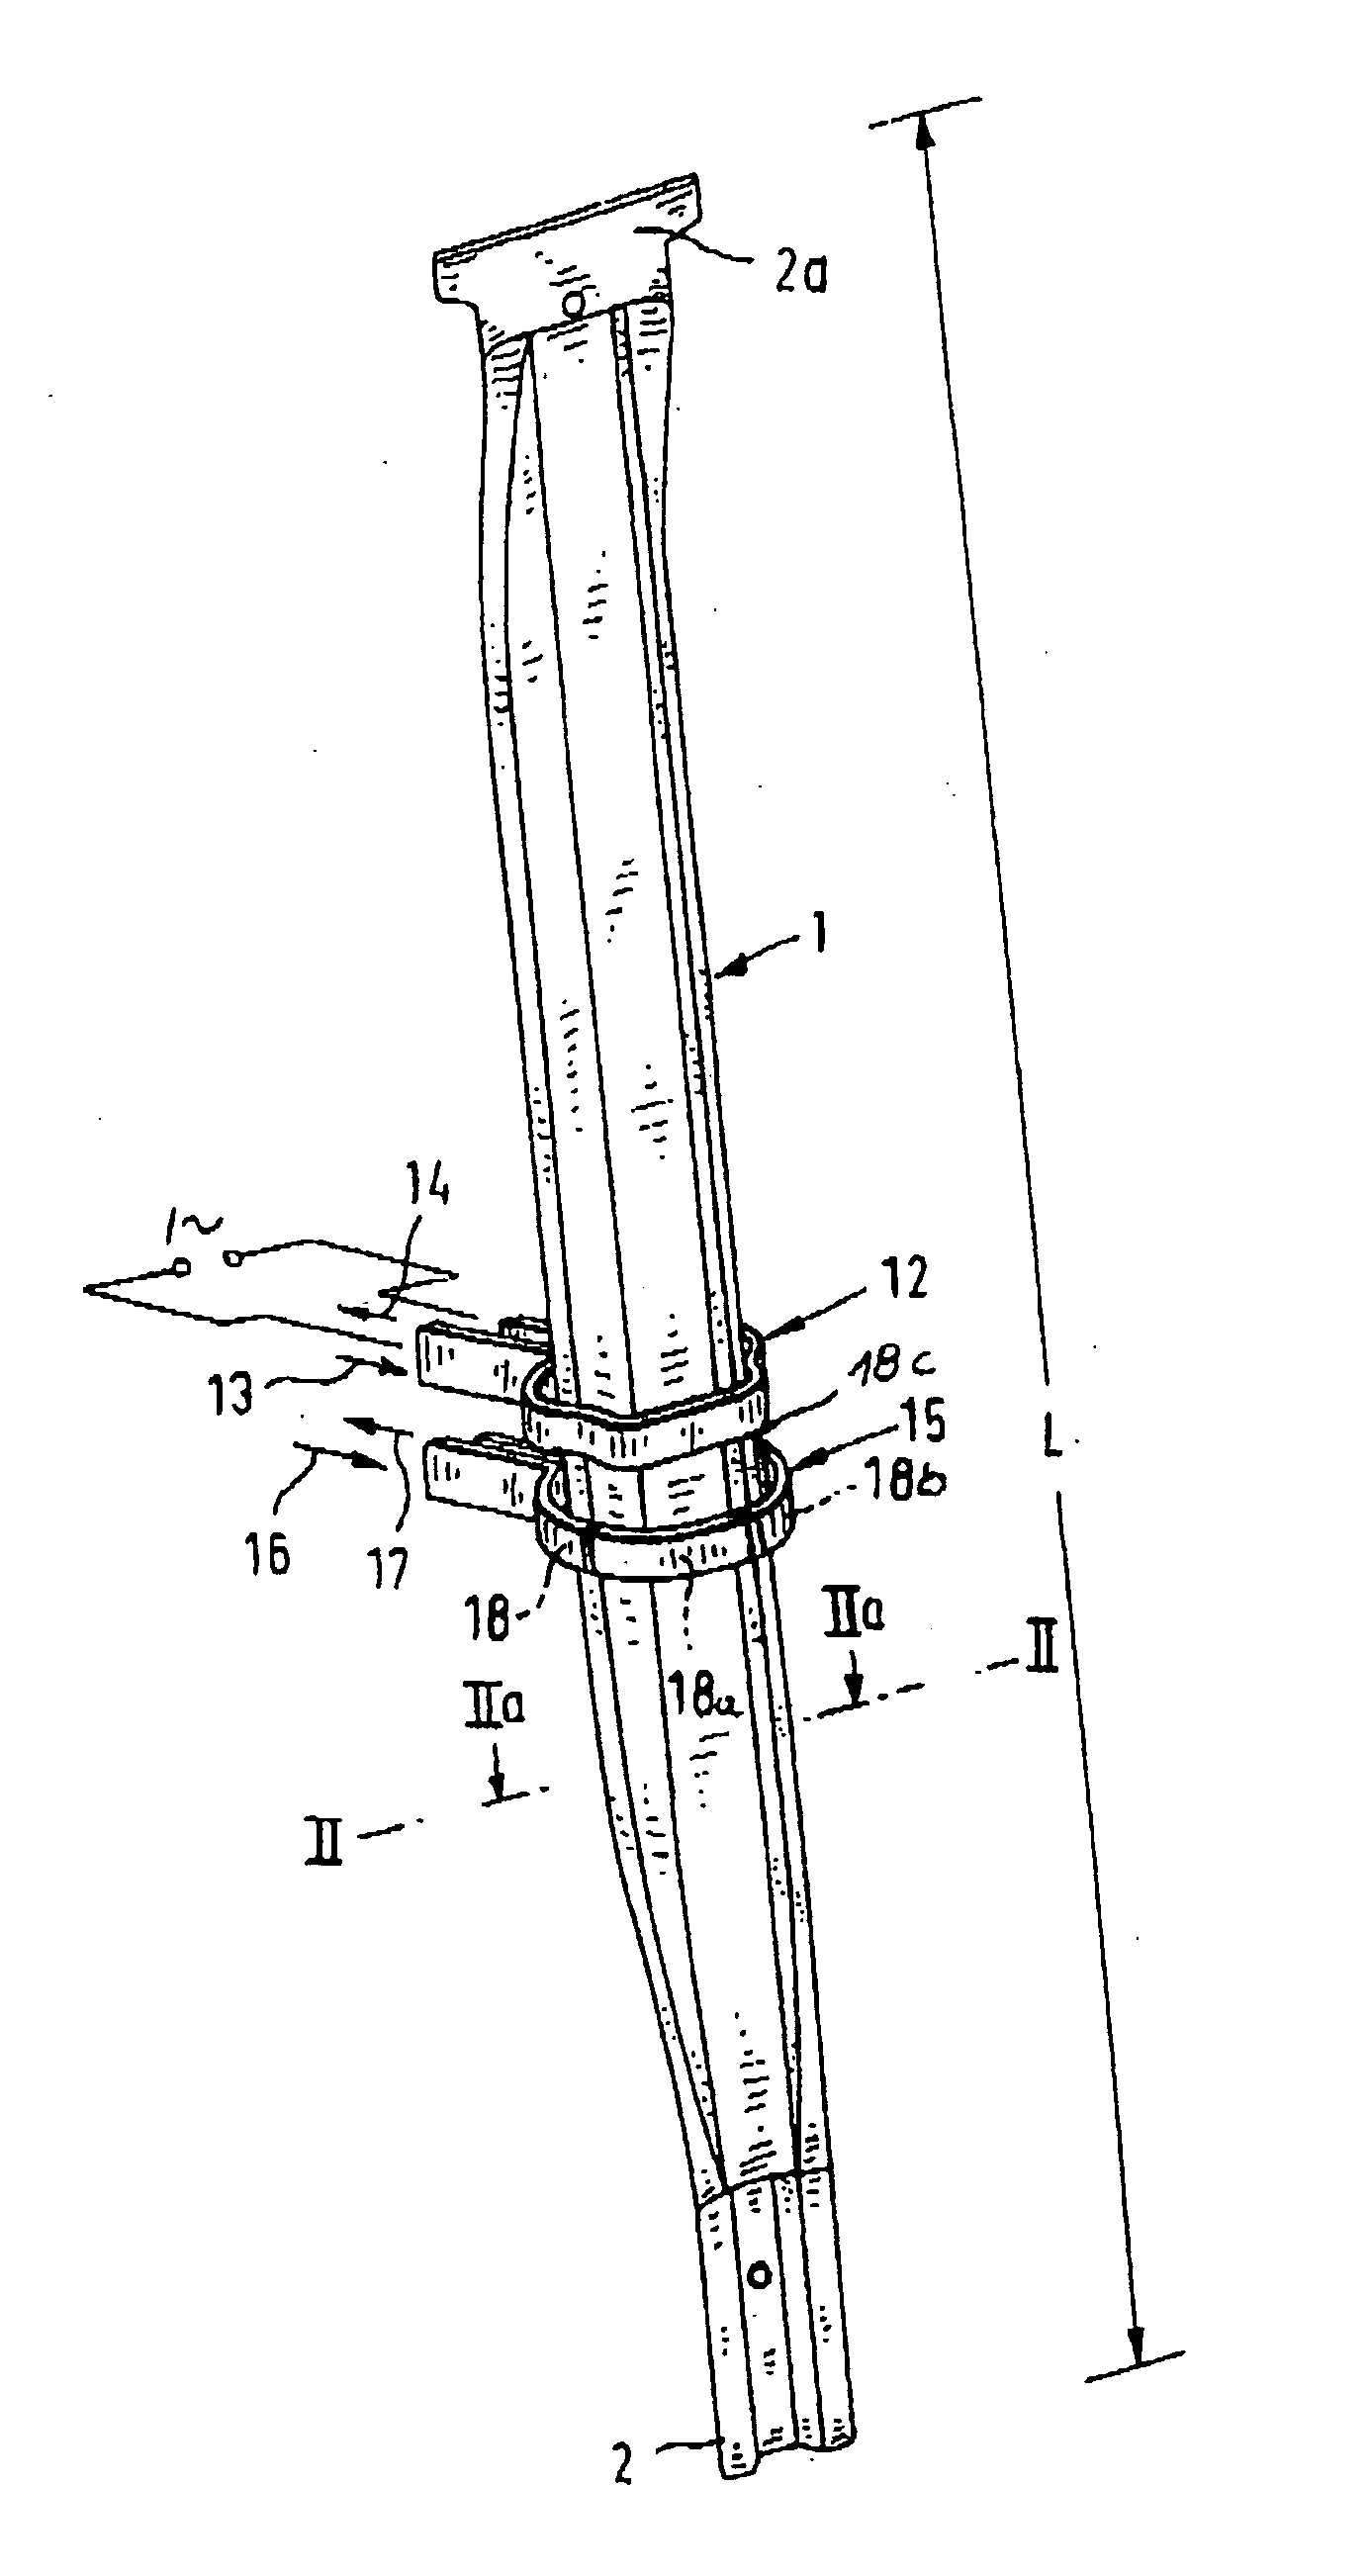 Apparatus for heat treatment of structural body parts in the automobile industry